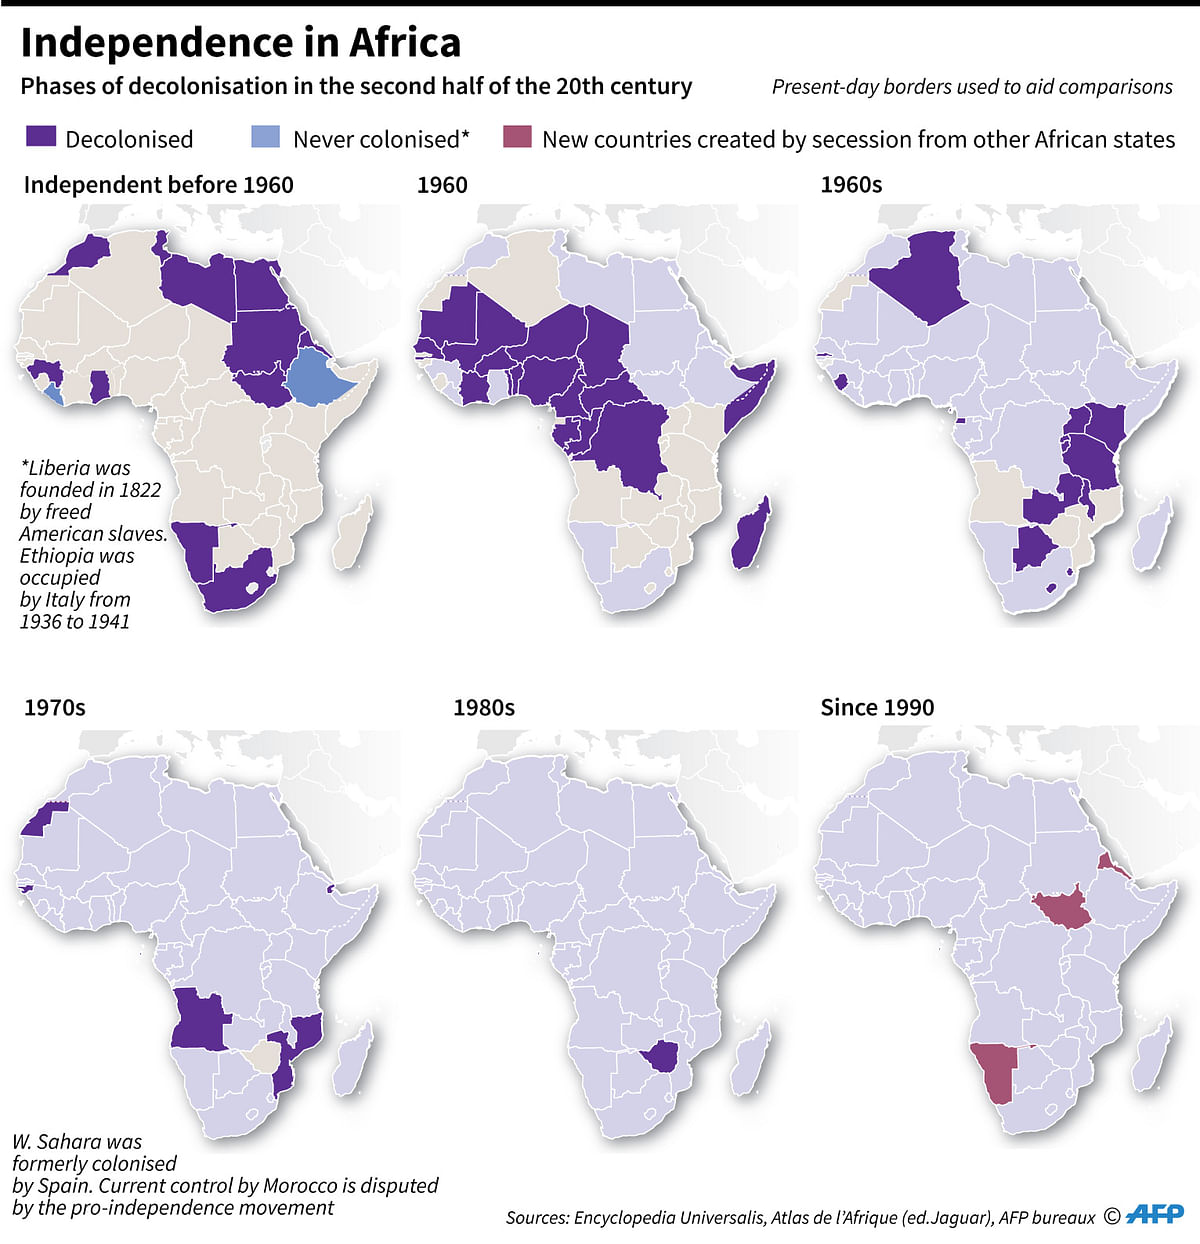 Phases of decolonisation in Africa. Photo: AFP